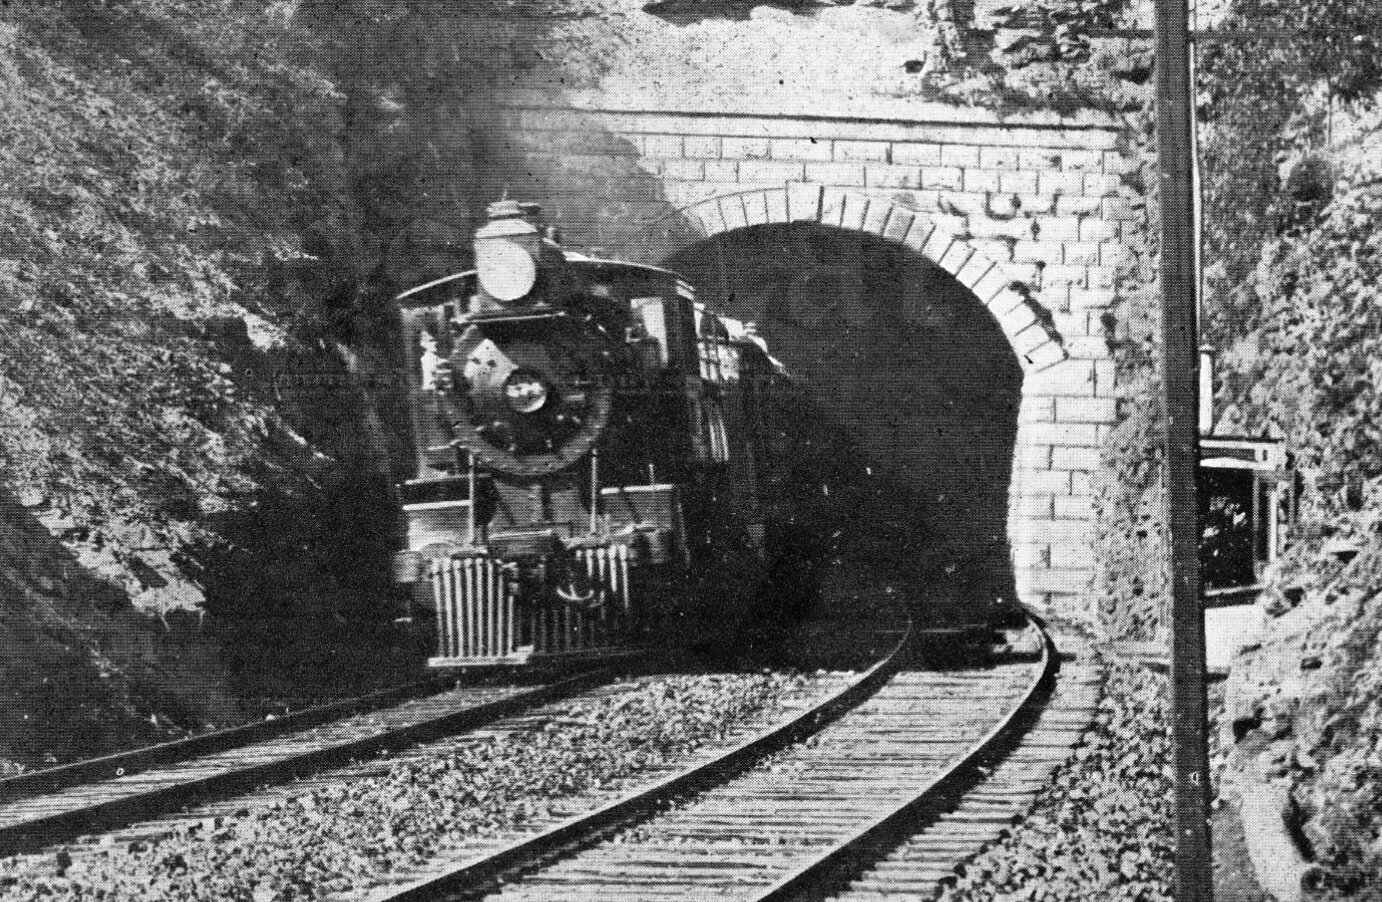 A major project that changed the Rockhill region was the Landis Ridge train tunnel, which began construction in 1853 and, at that time, became the longest tunnel in eastern Pennsylvania.